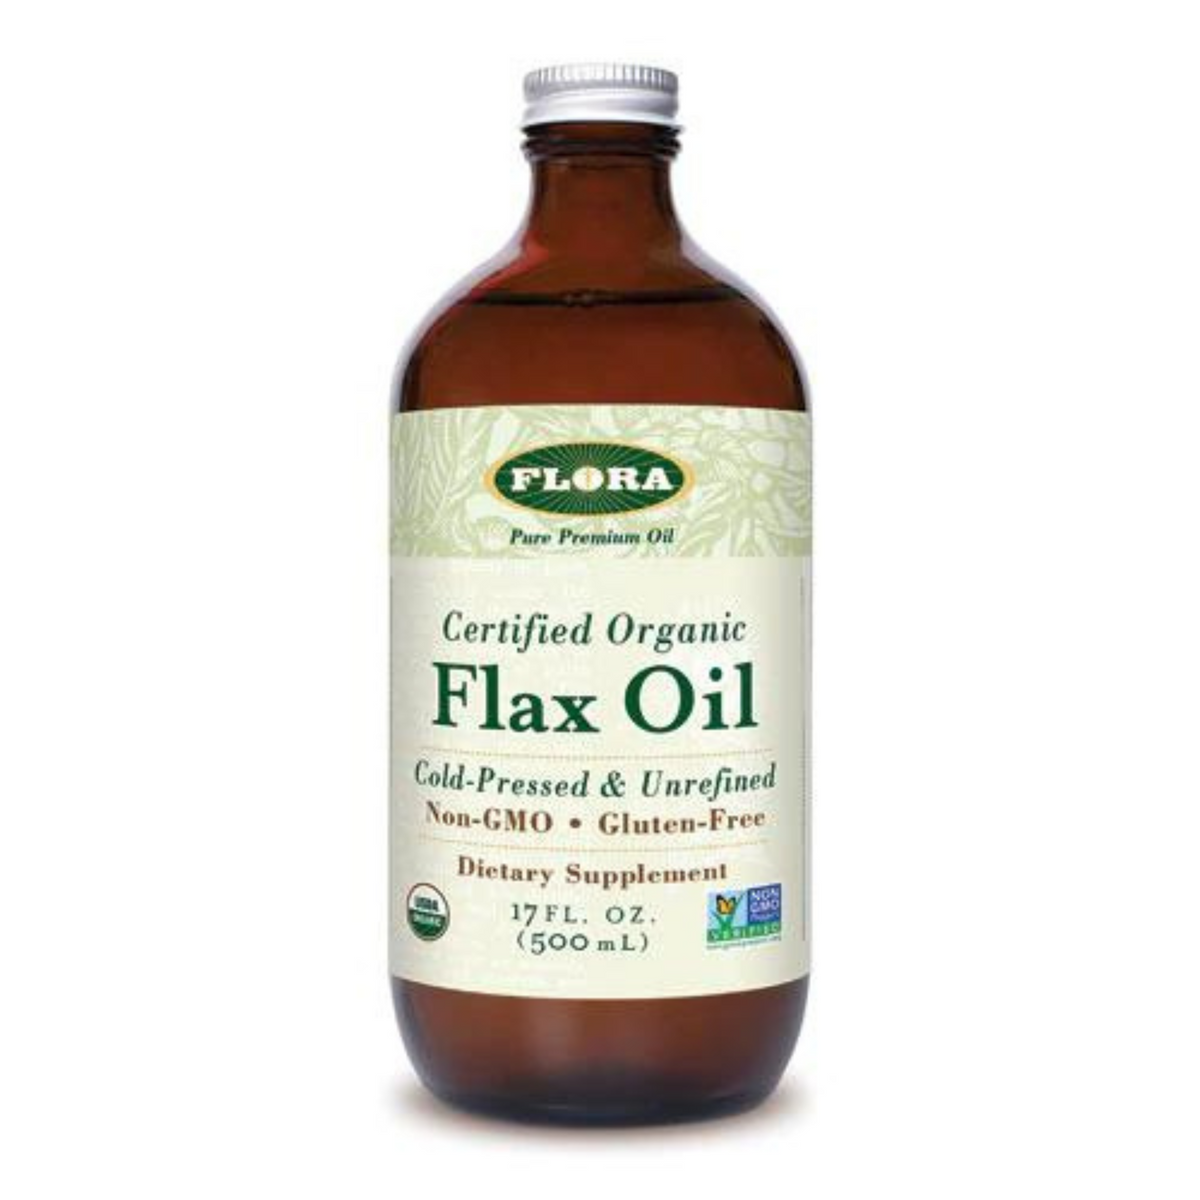 Primary image of Certified Organic Flax Oil 17 oz